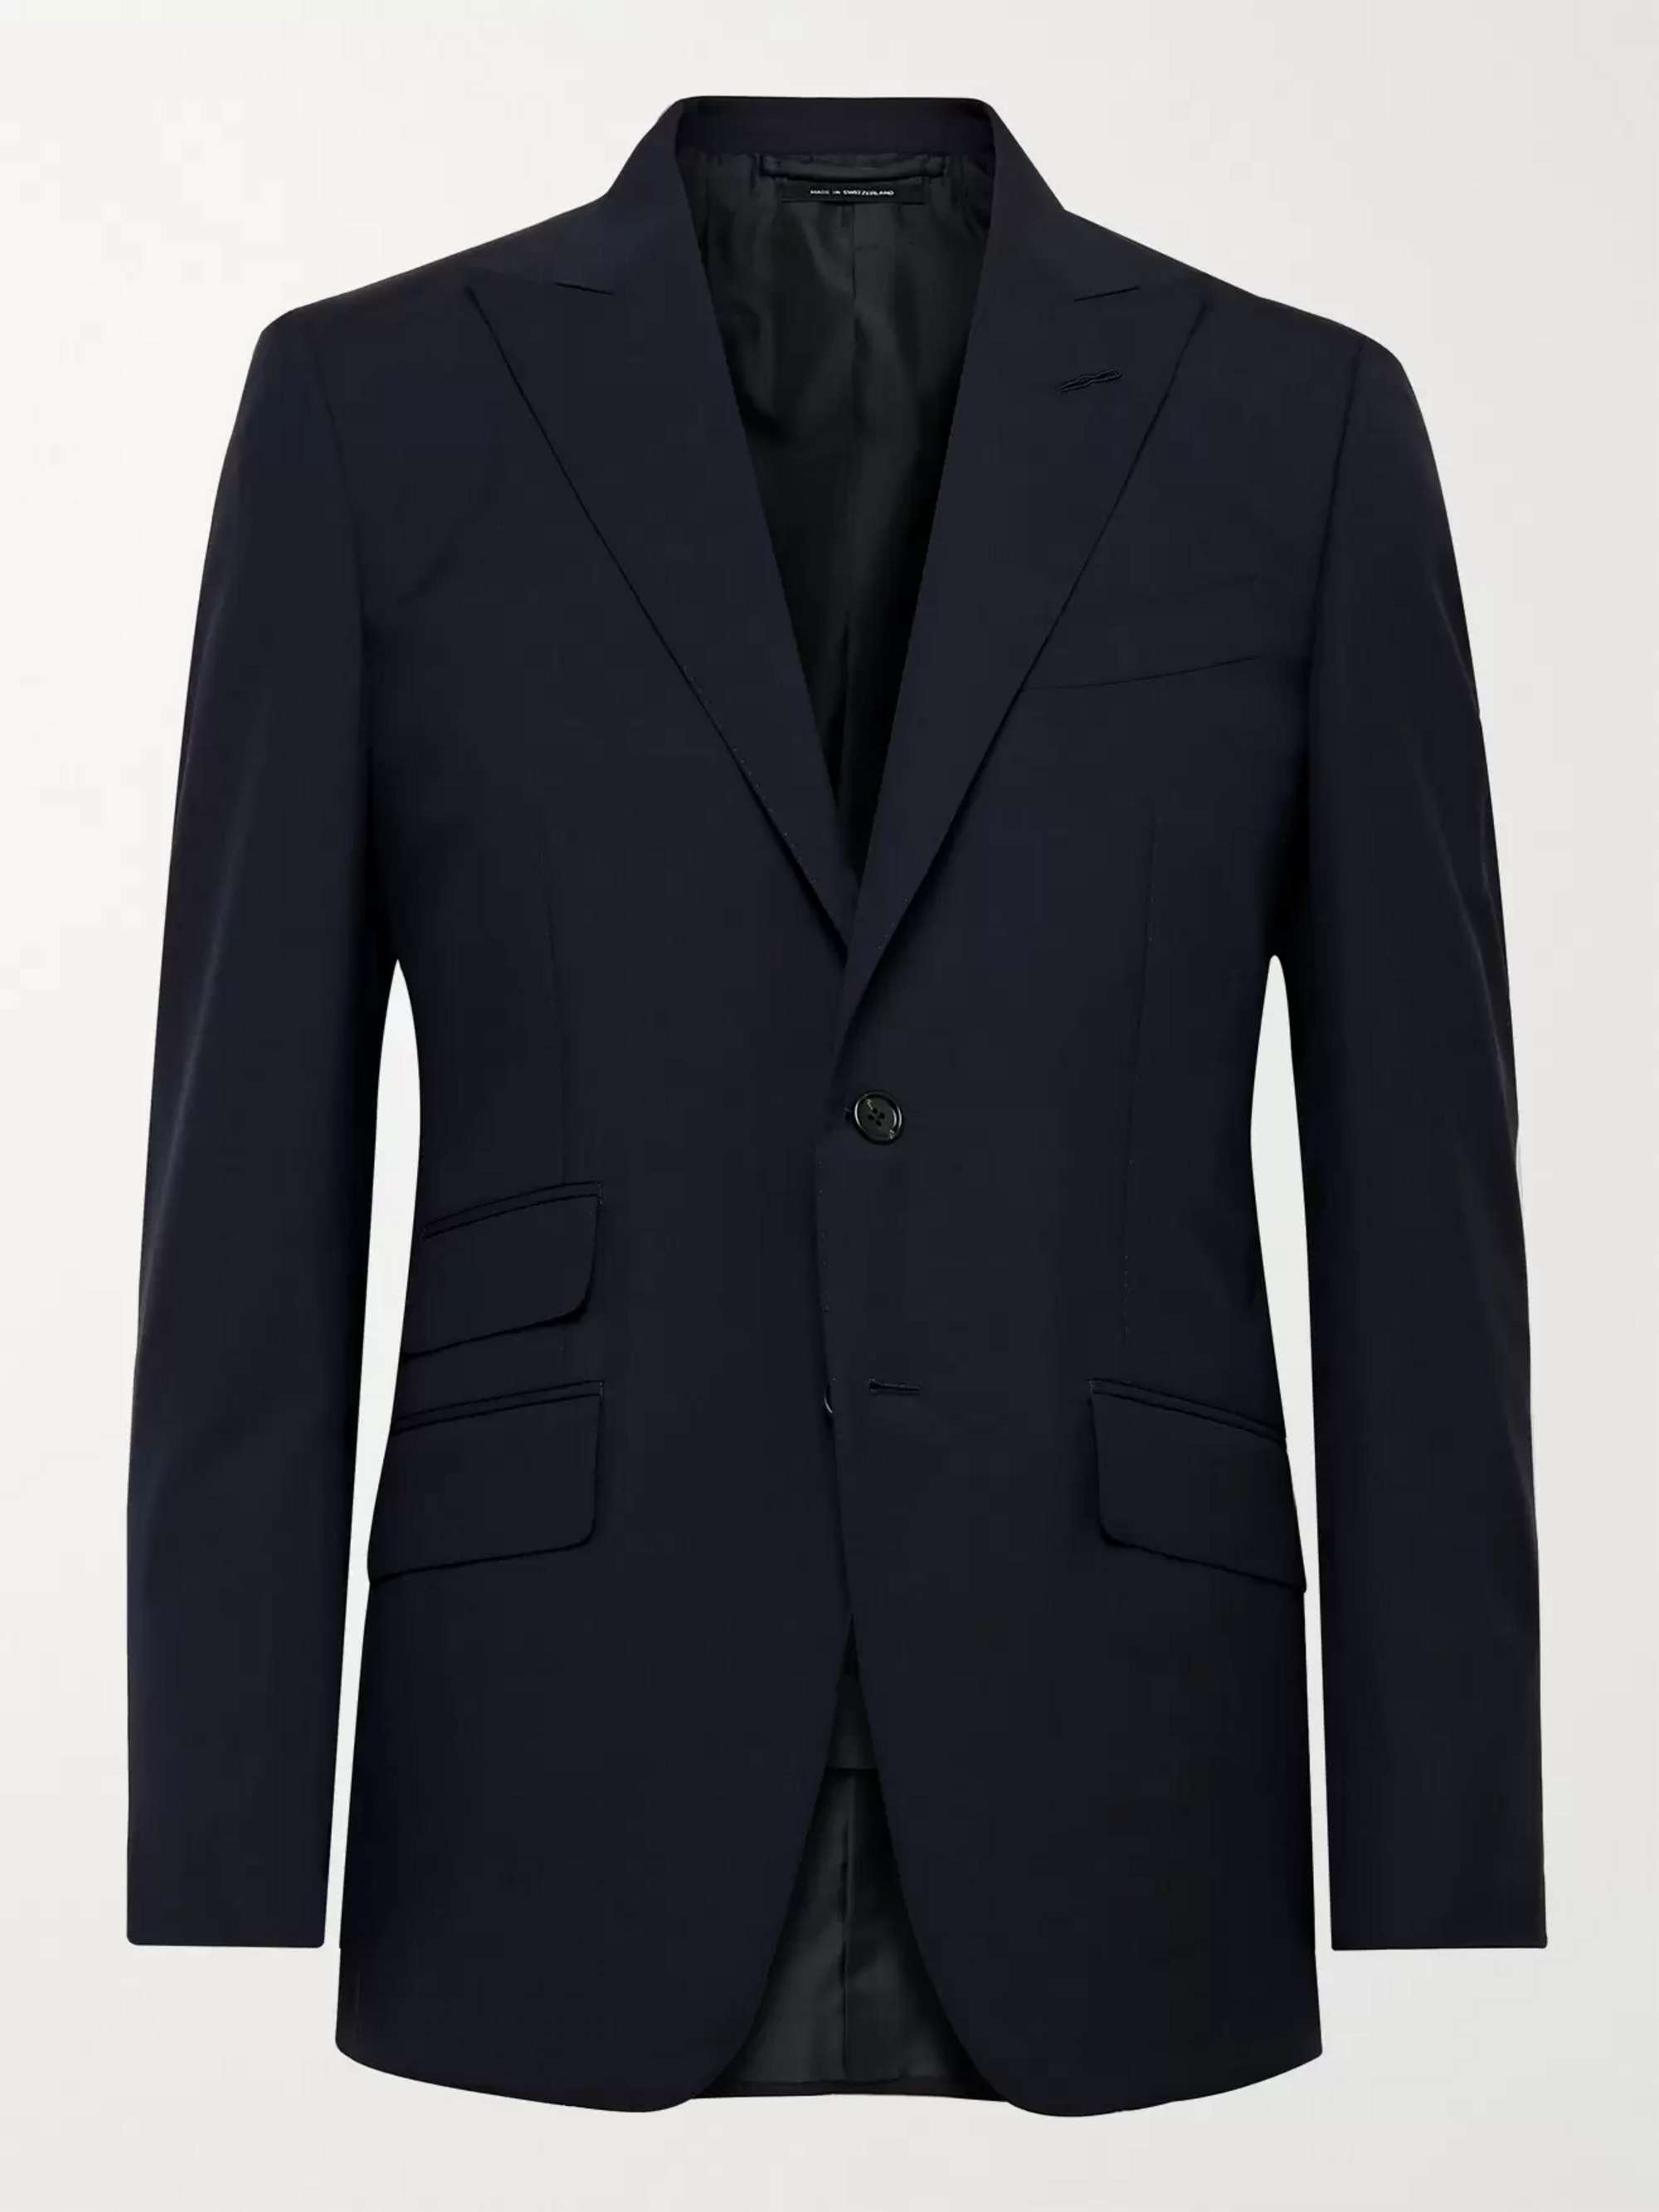 TOM FORD O'Connor Slim-Fit Super 120s Wool Suit Jacket